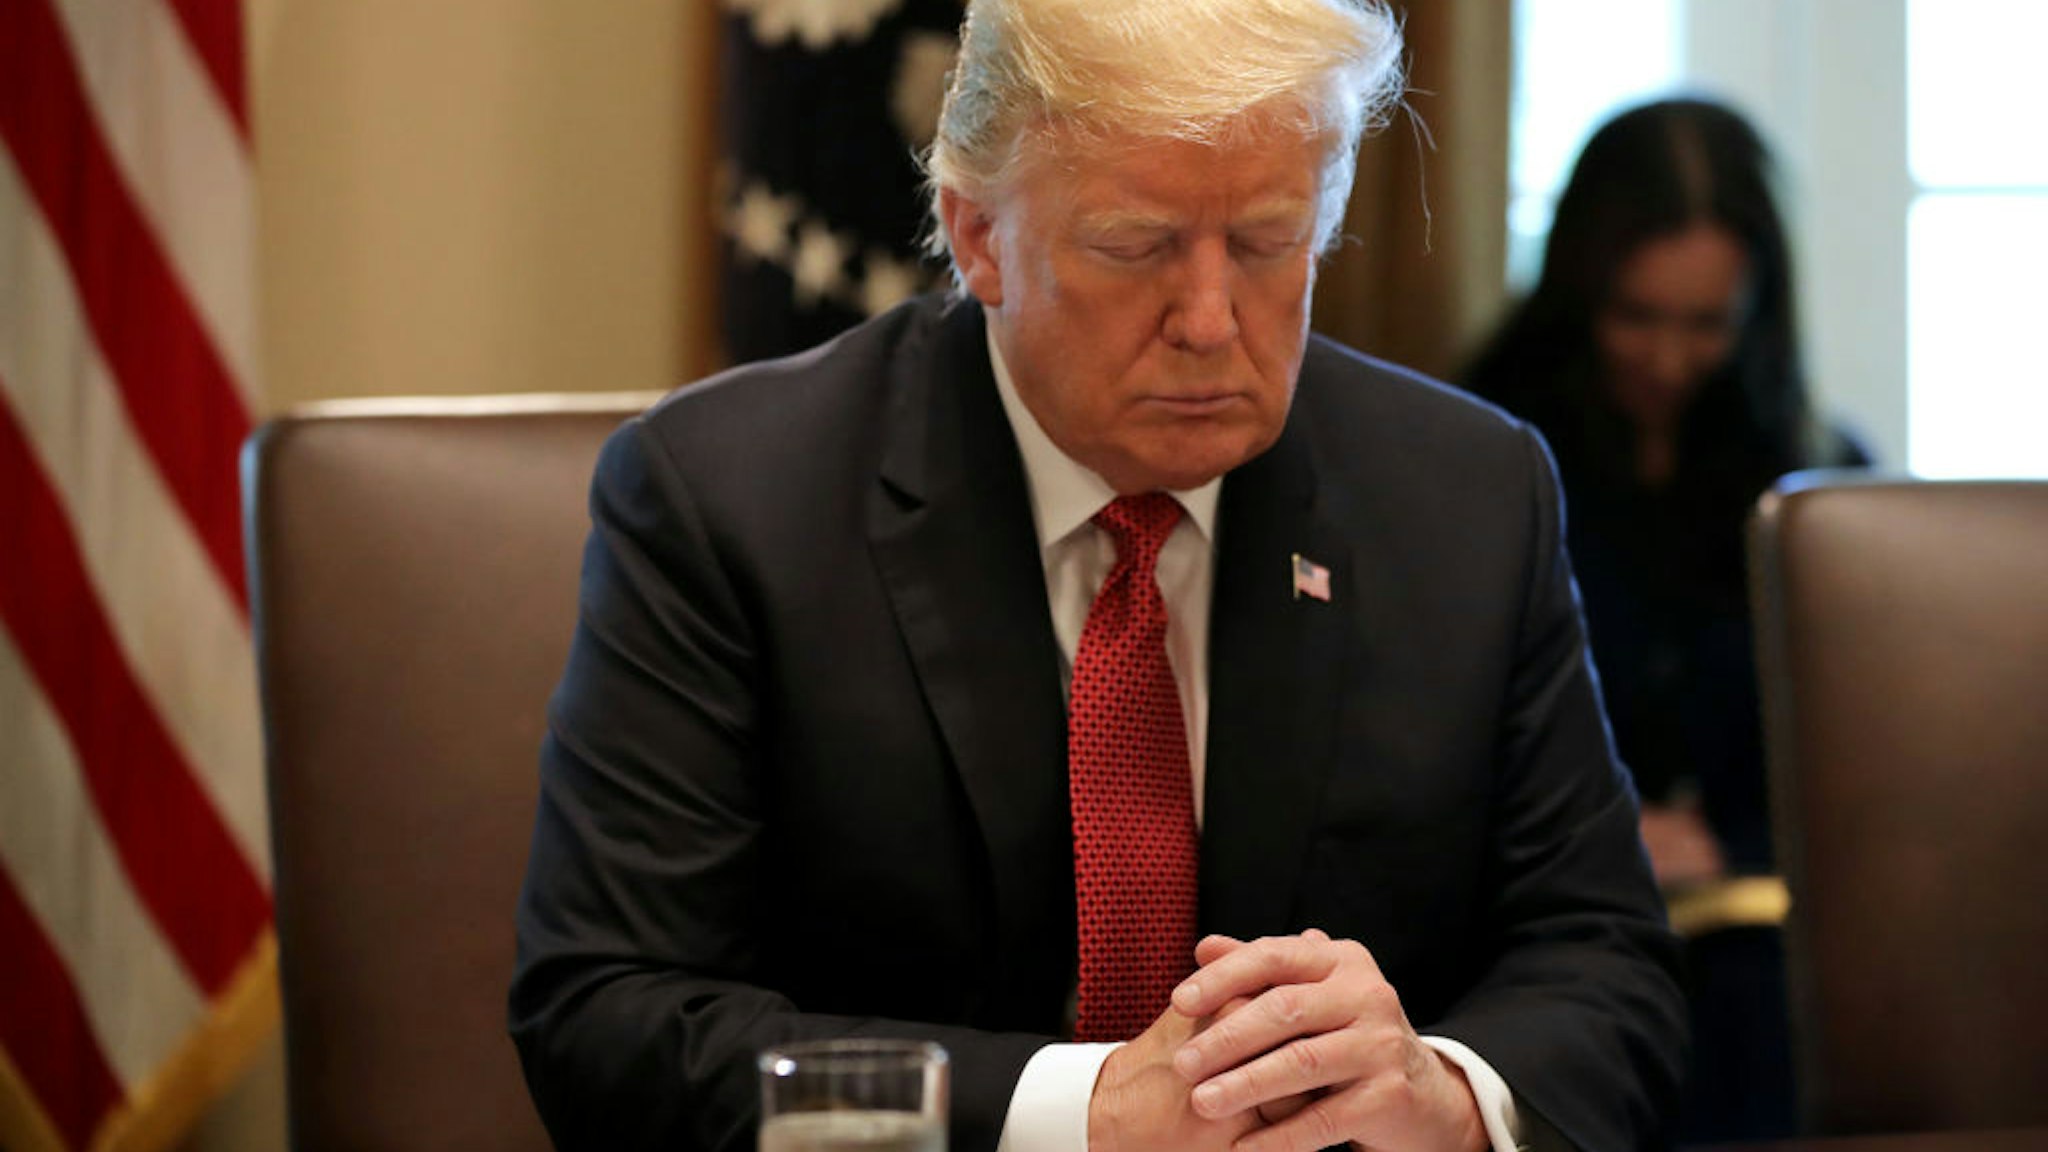 U.S. President Donald Trump closes his eyes during a prayer before a meeting of his cabinet in the Cabinet Room at the White House October 17, 2018 in Washington, DC.